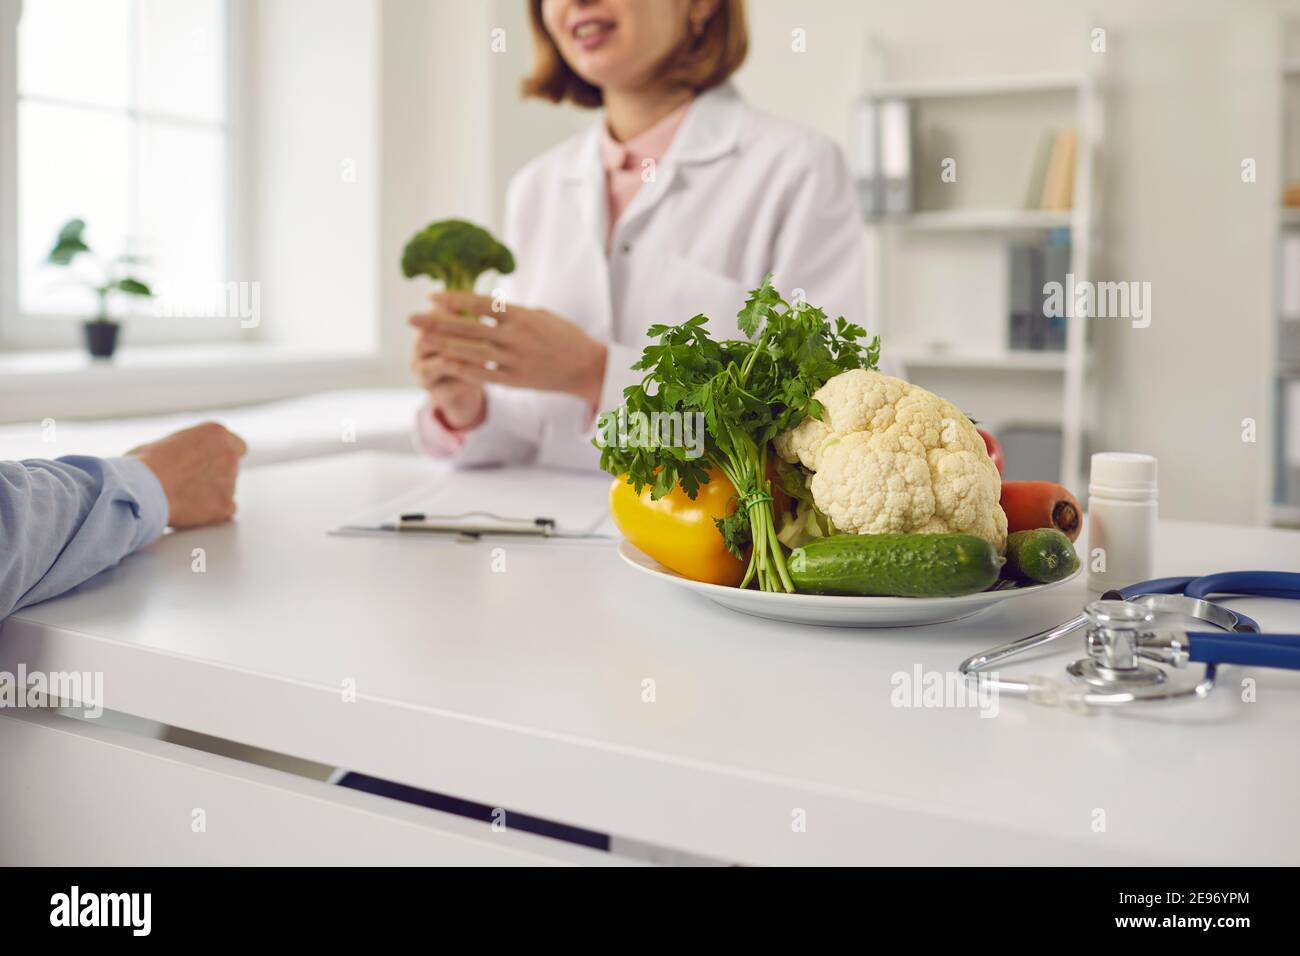 Positive woman doctor nutritiologist talking with man patient about benefits of fresh vegan healthy diet Stock Photo